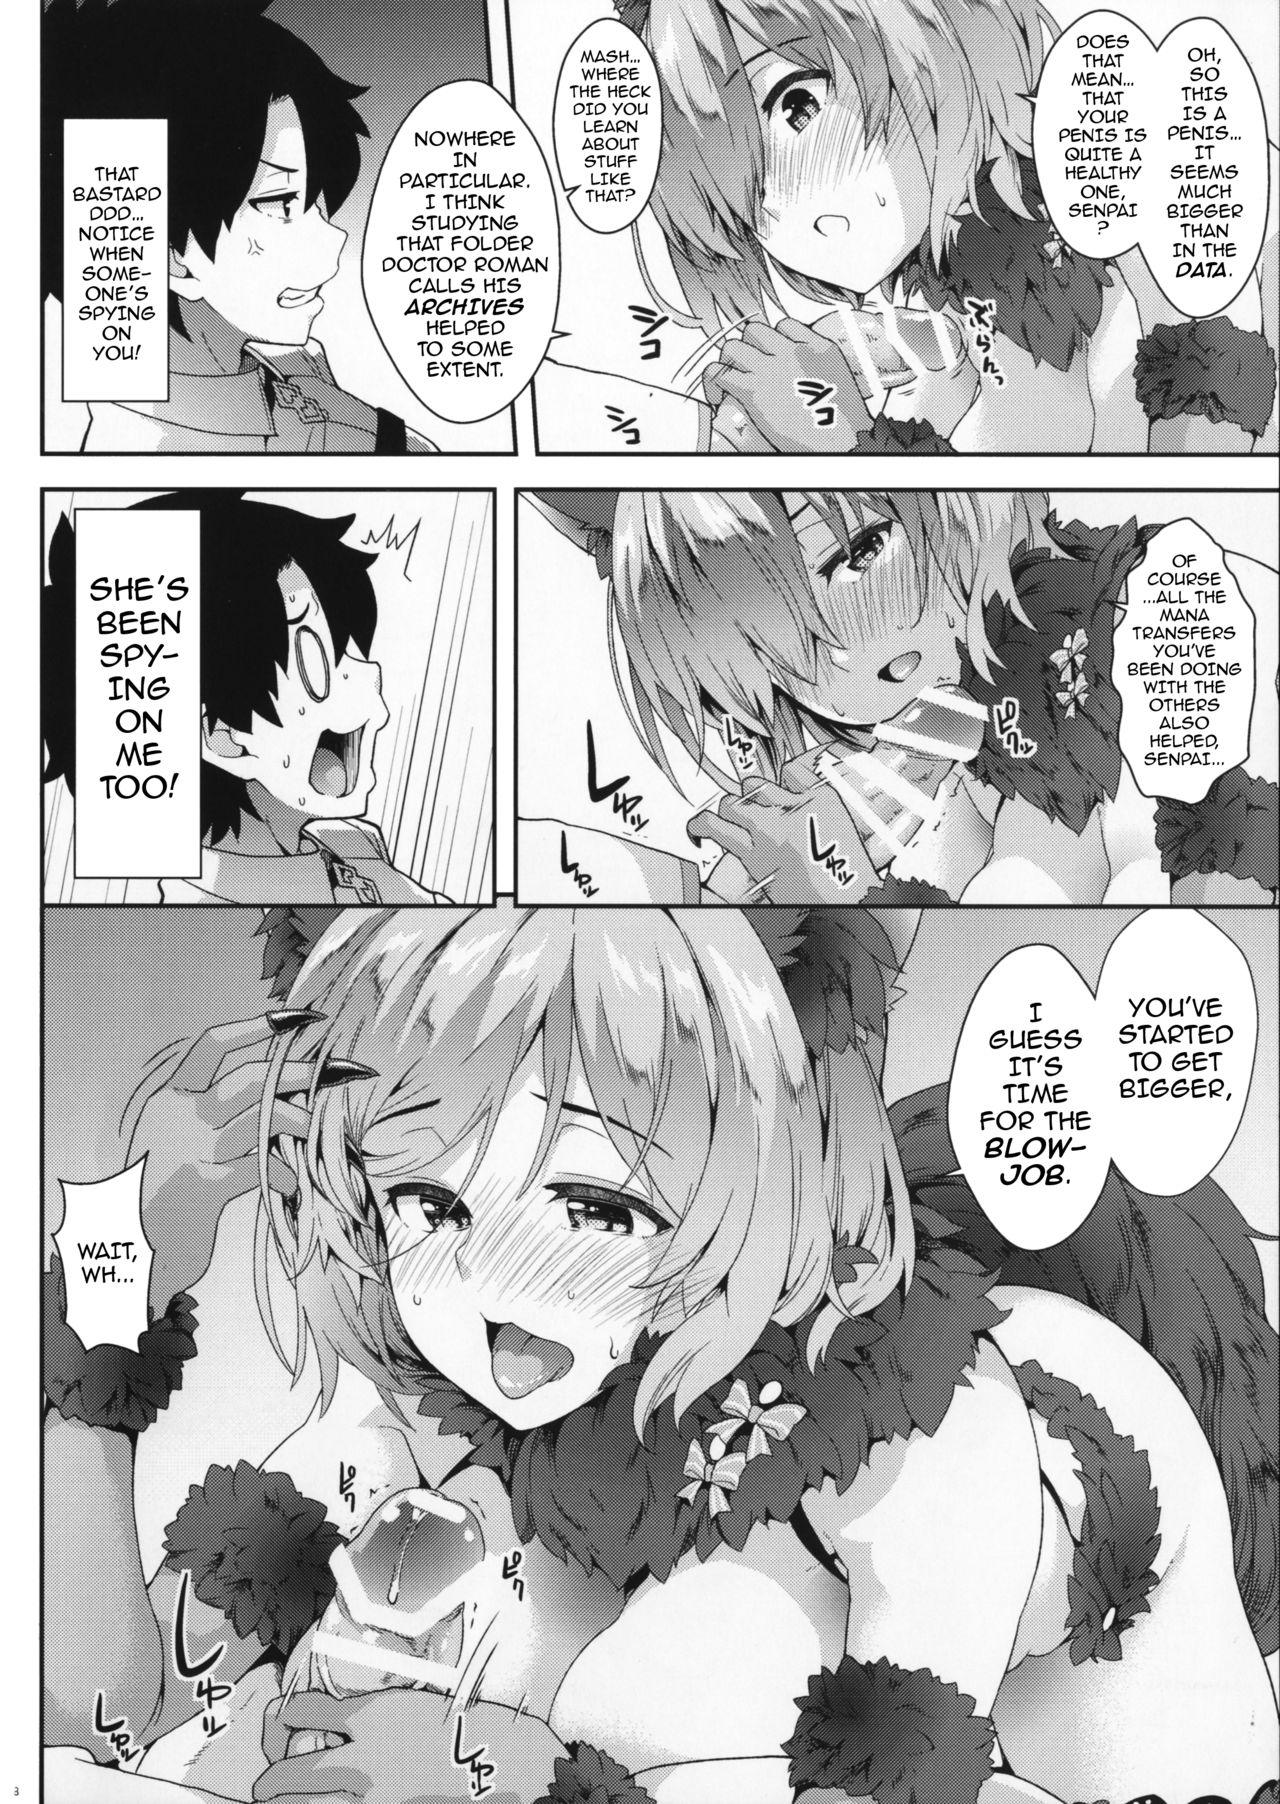 Tugging Why am I jealous of you? - Fate grand order Beurette - Page 7